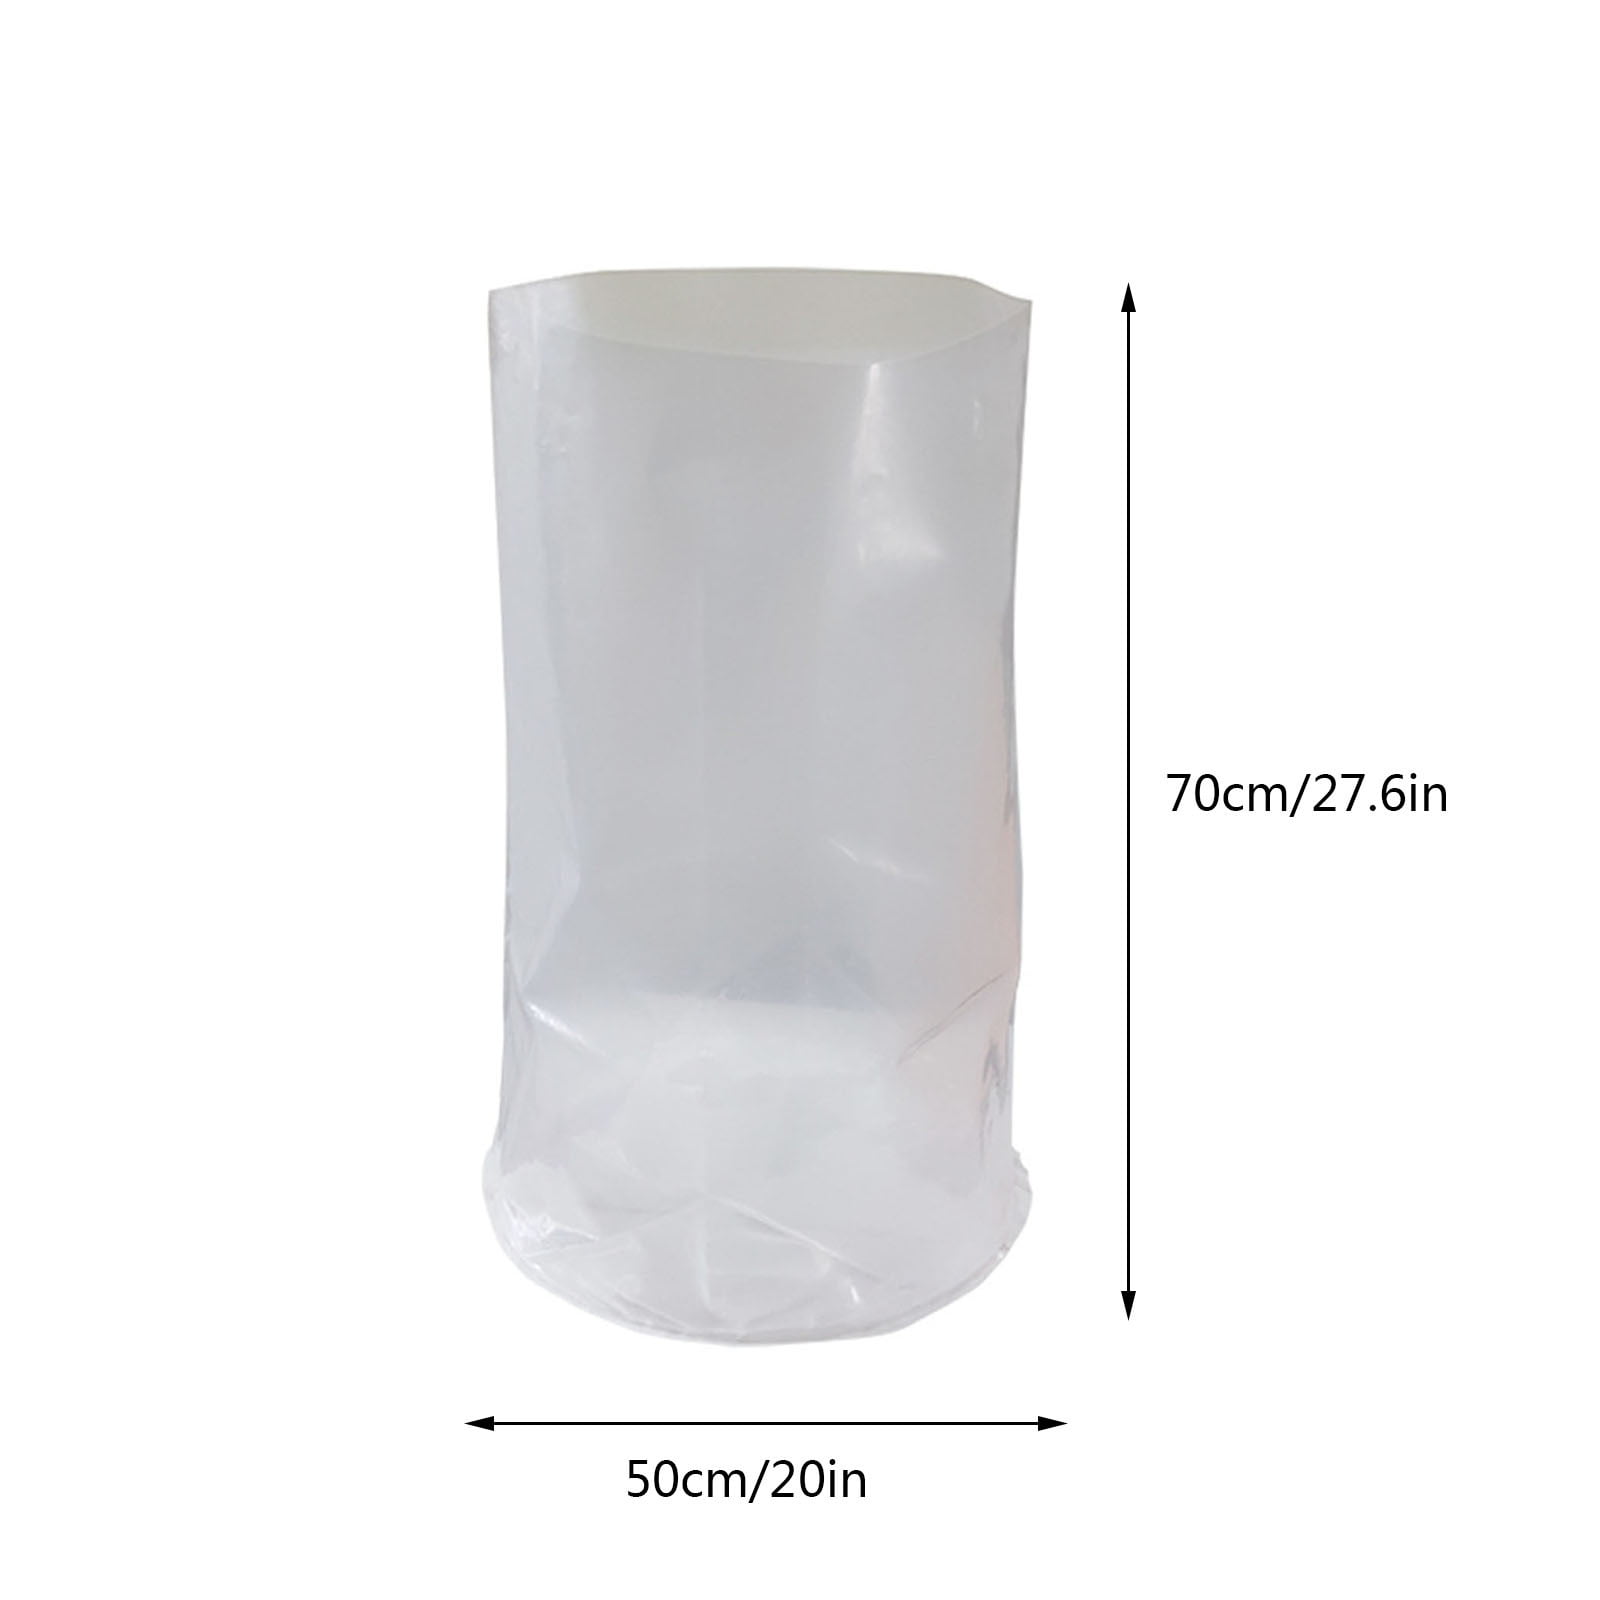 Details about   5 Gallon Bucket Liner Bags For Storage Food Extra Heavy Duty Leak Proof 10/12PCS 